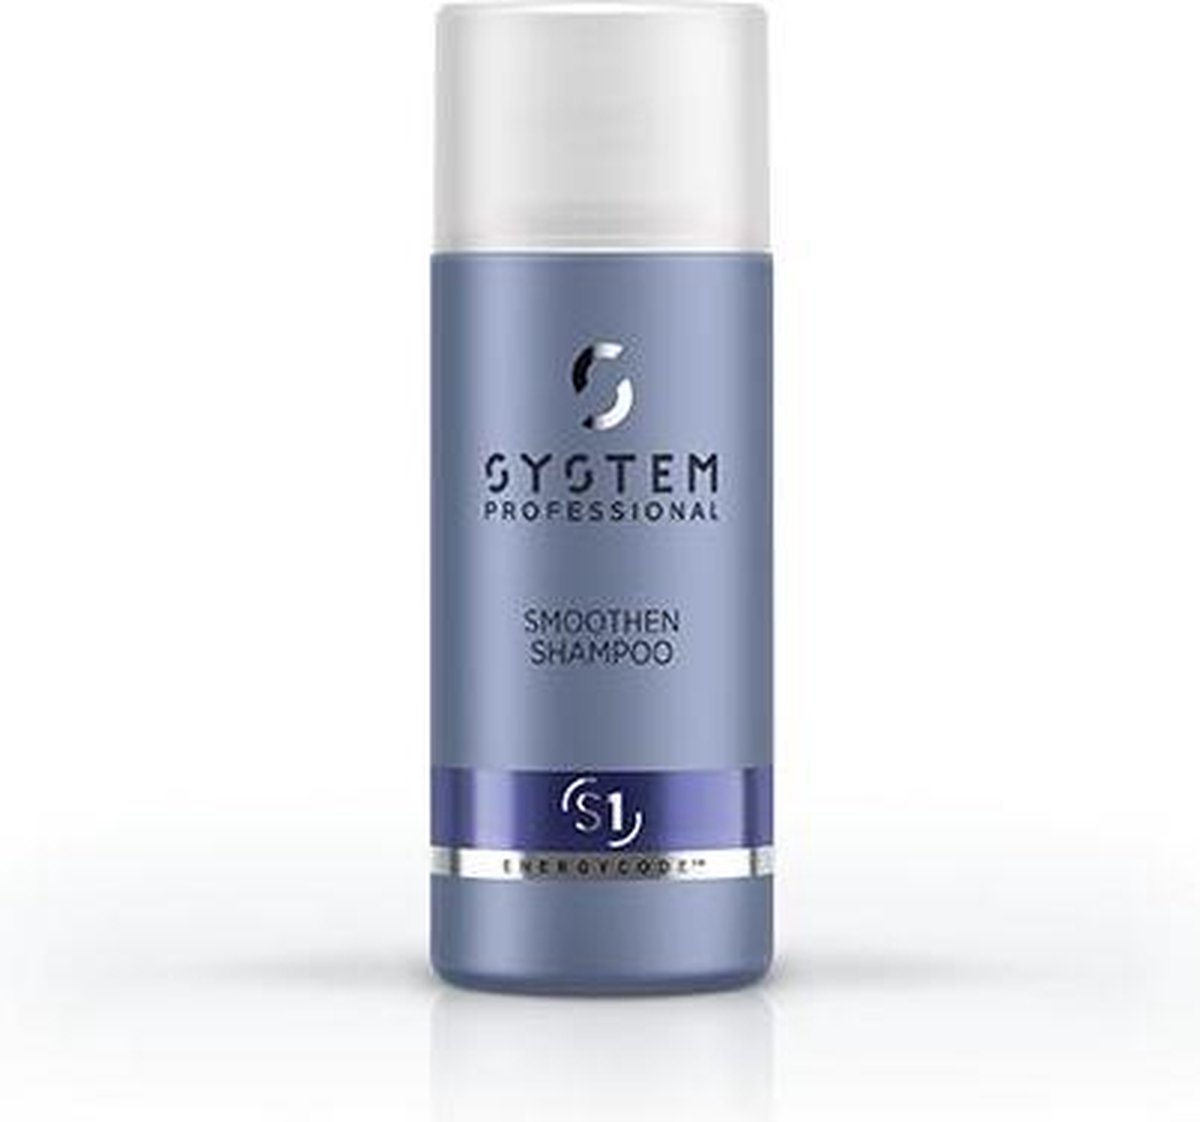 System Professional Smoothen Shampoo 50ml